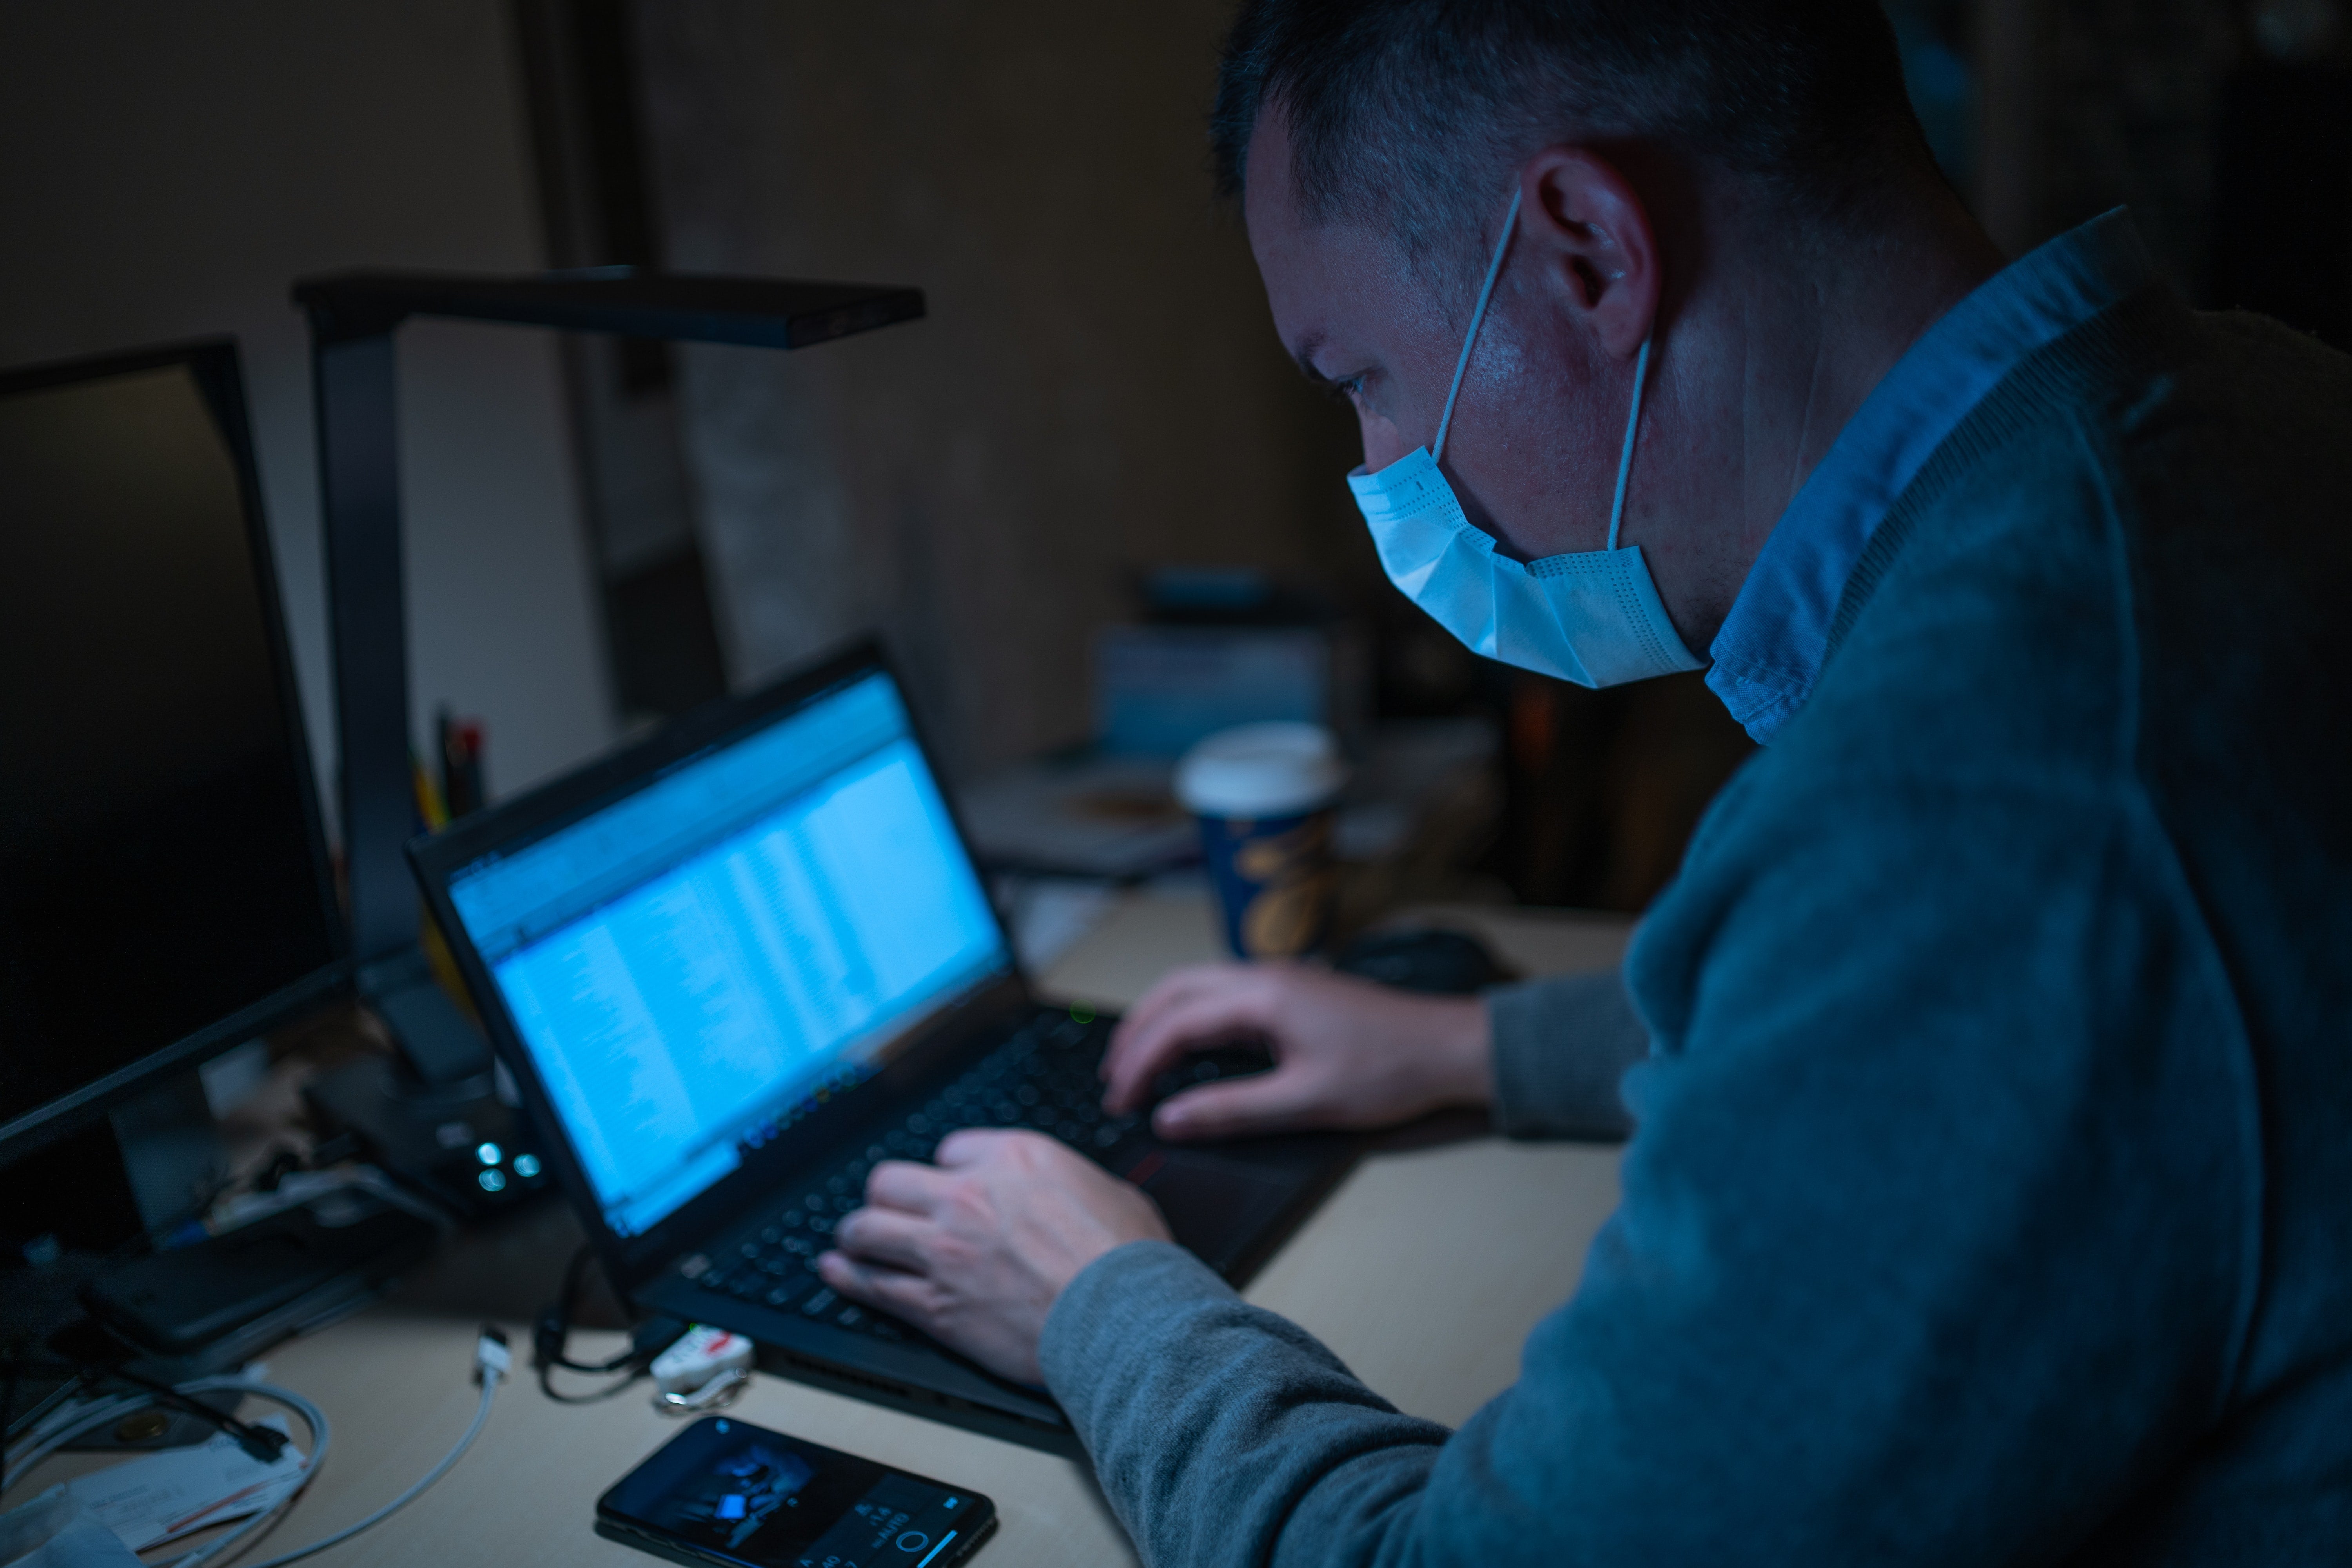 A man wearing a surgical mask types on a laptop at a desk.